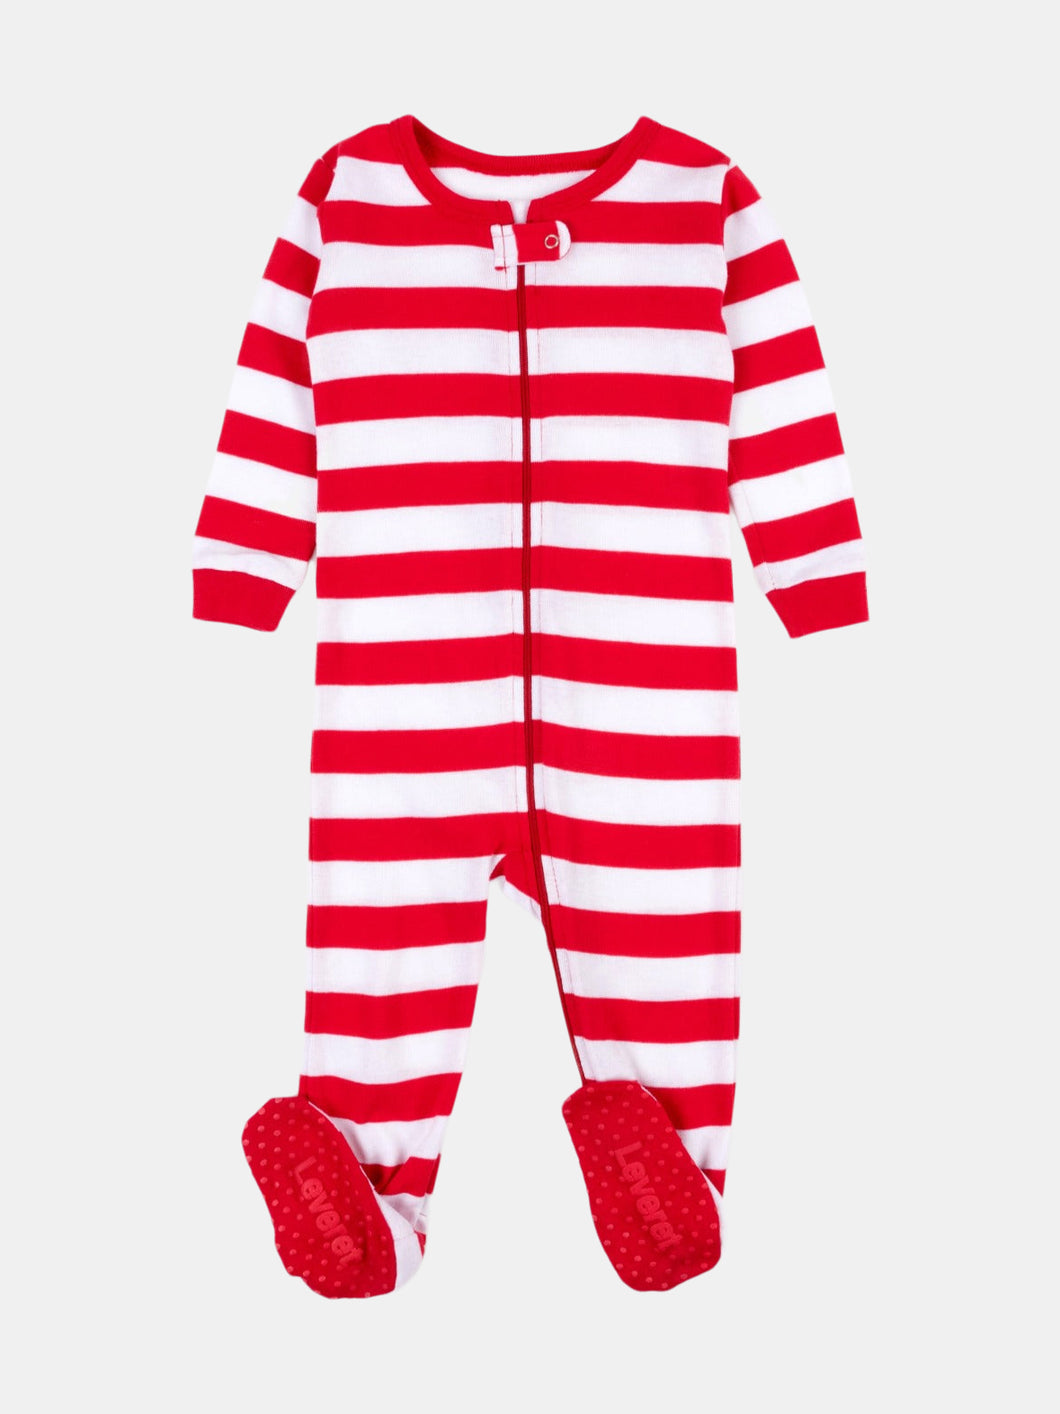 Baby Footed Red Striped Pajamas